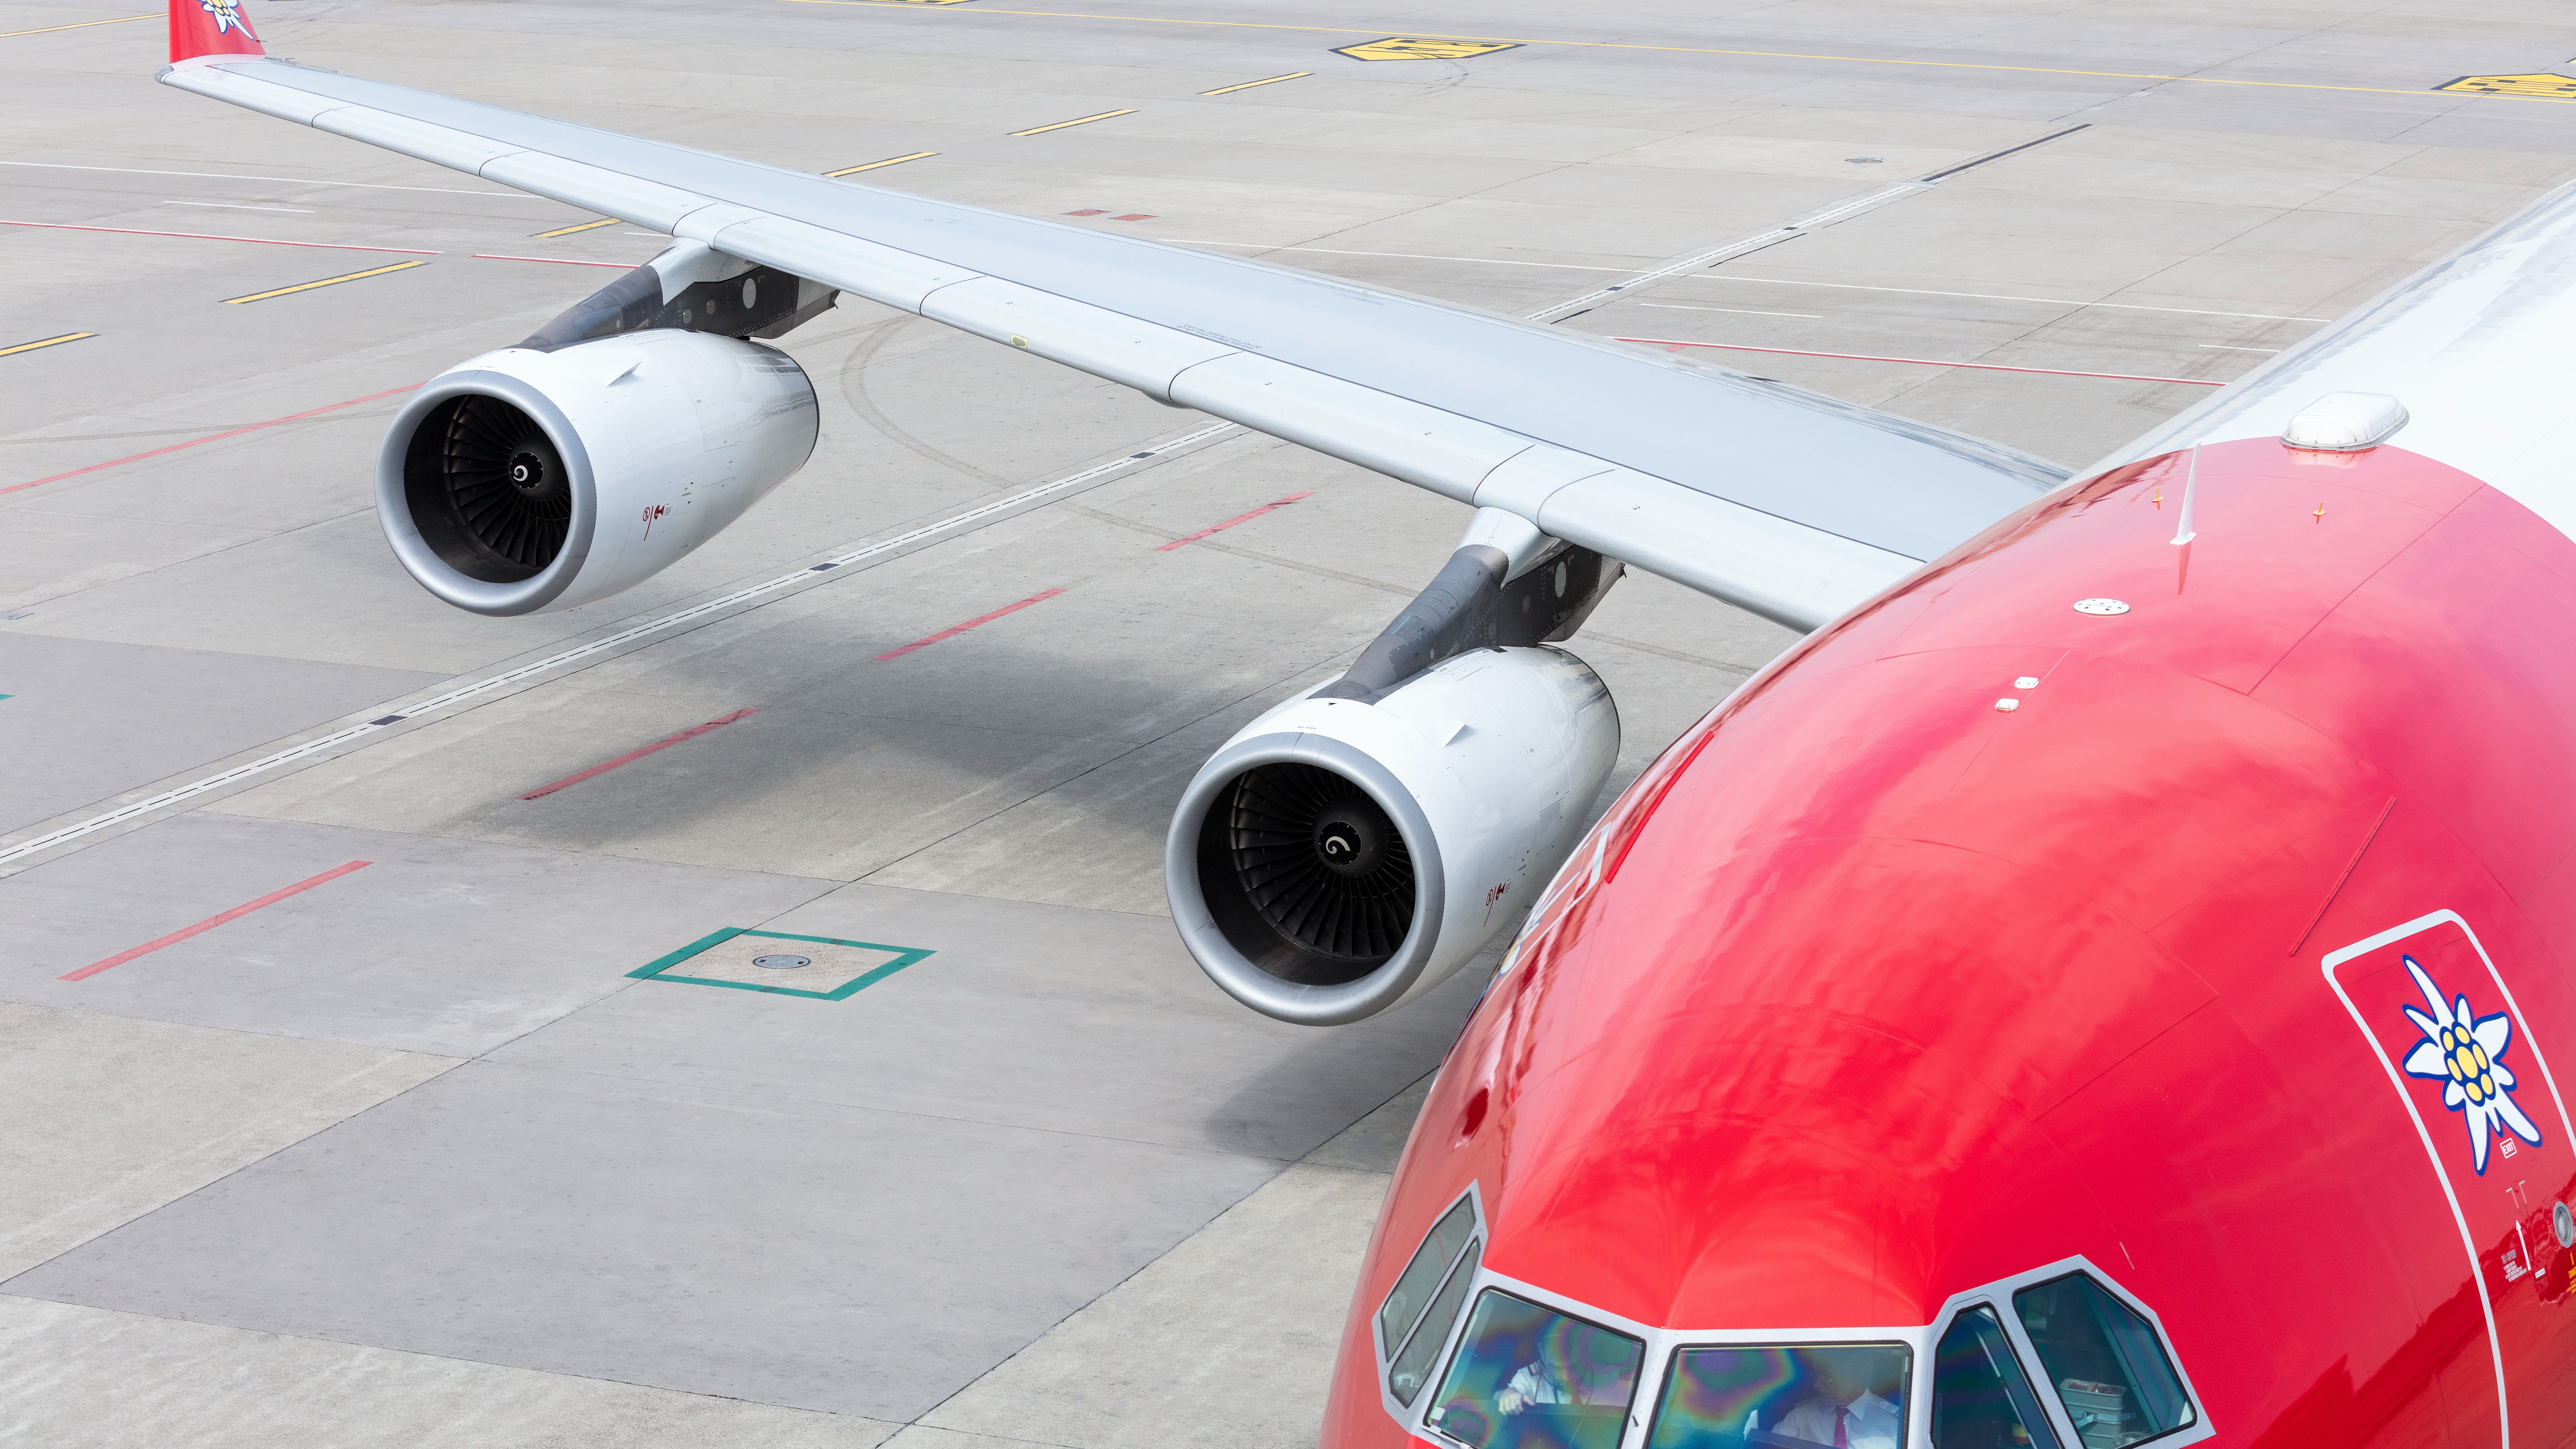 A closeup of two engines of an Edelweiss Airbus A340.